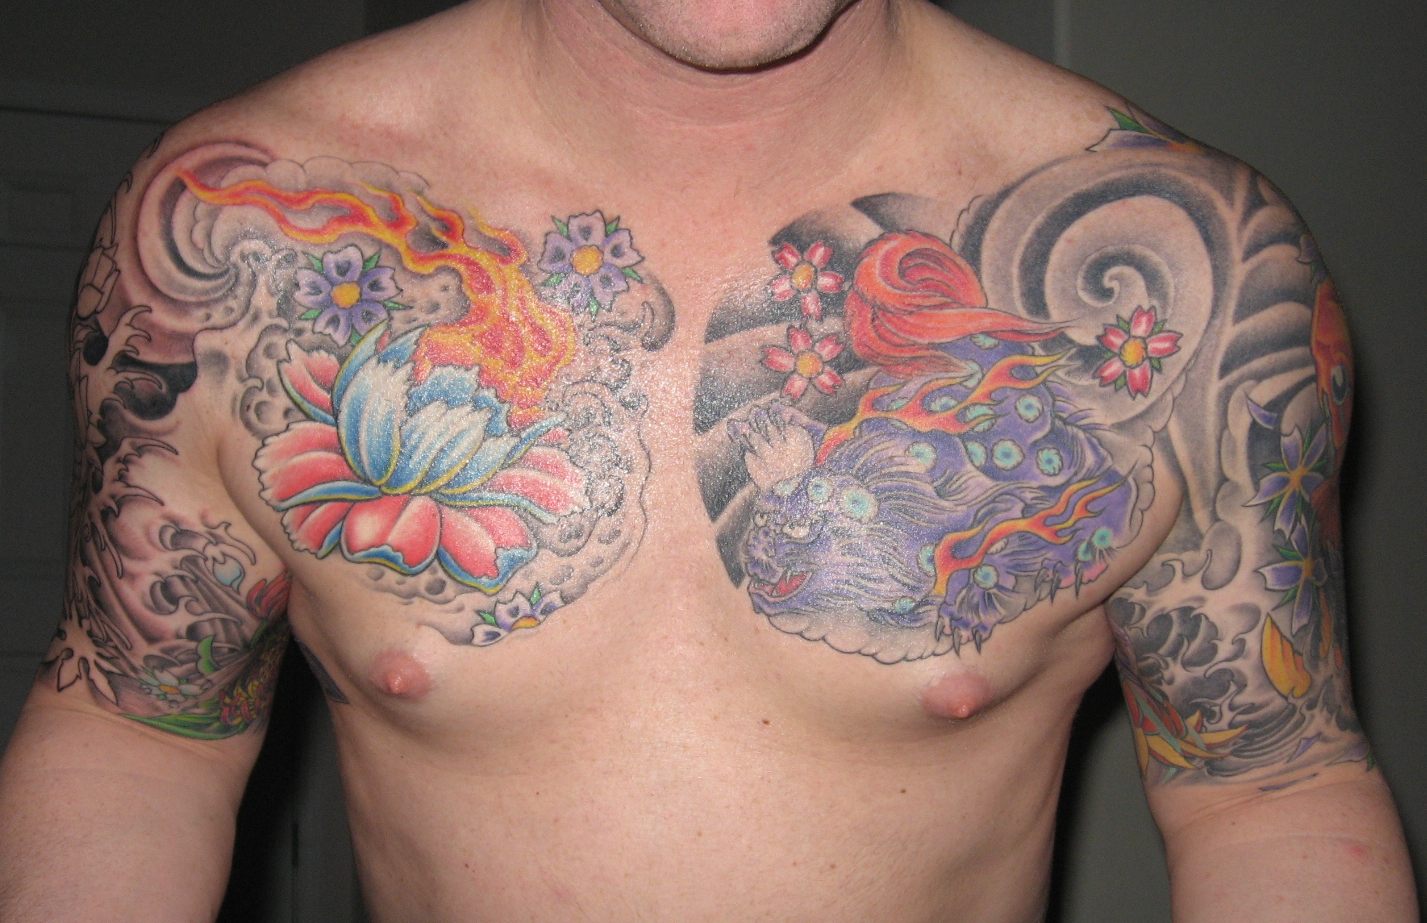 tribal chest tattoo designs FREE TATTOO PICTURES: Tattoos For Men - A Guide to Choosing a Design 